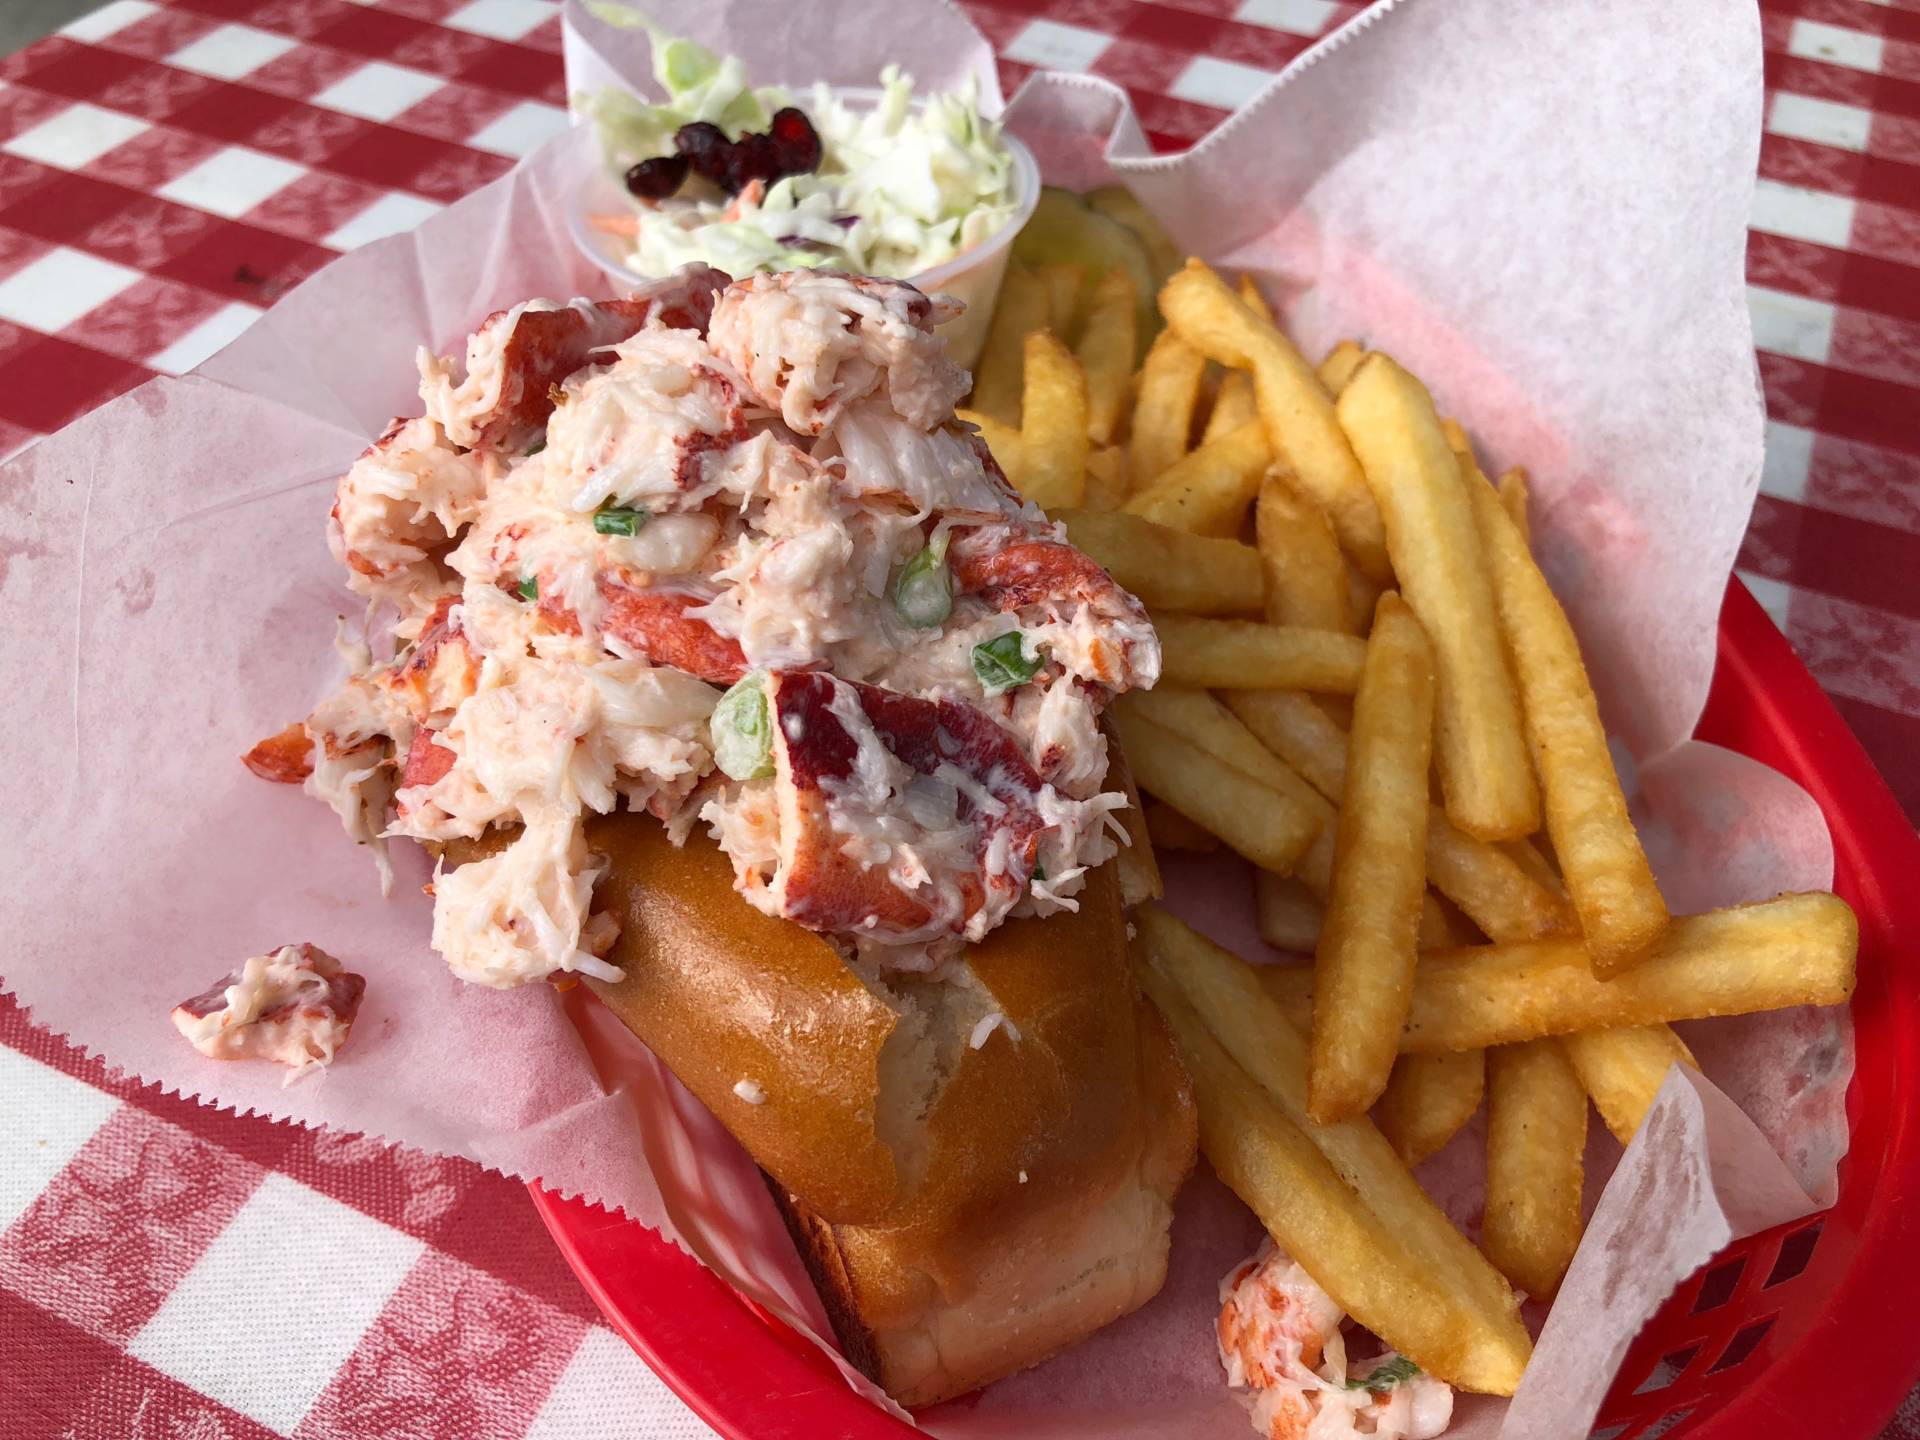 Mayonnaise-based lobster roll at Old Port Lobster Shack.